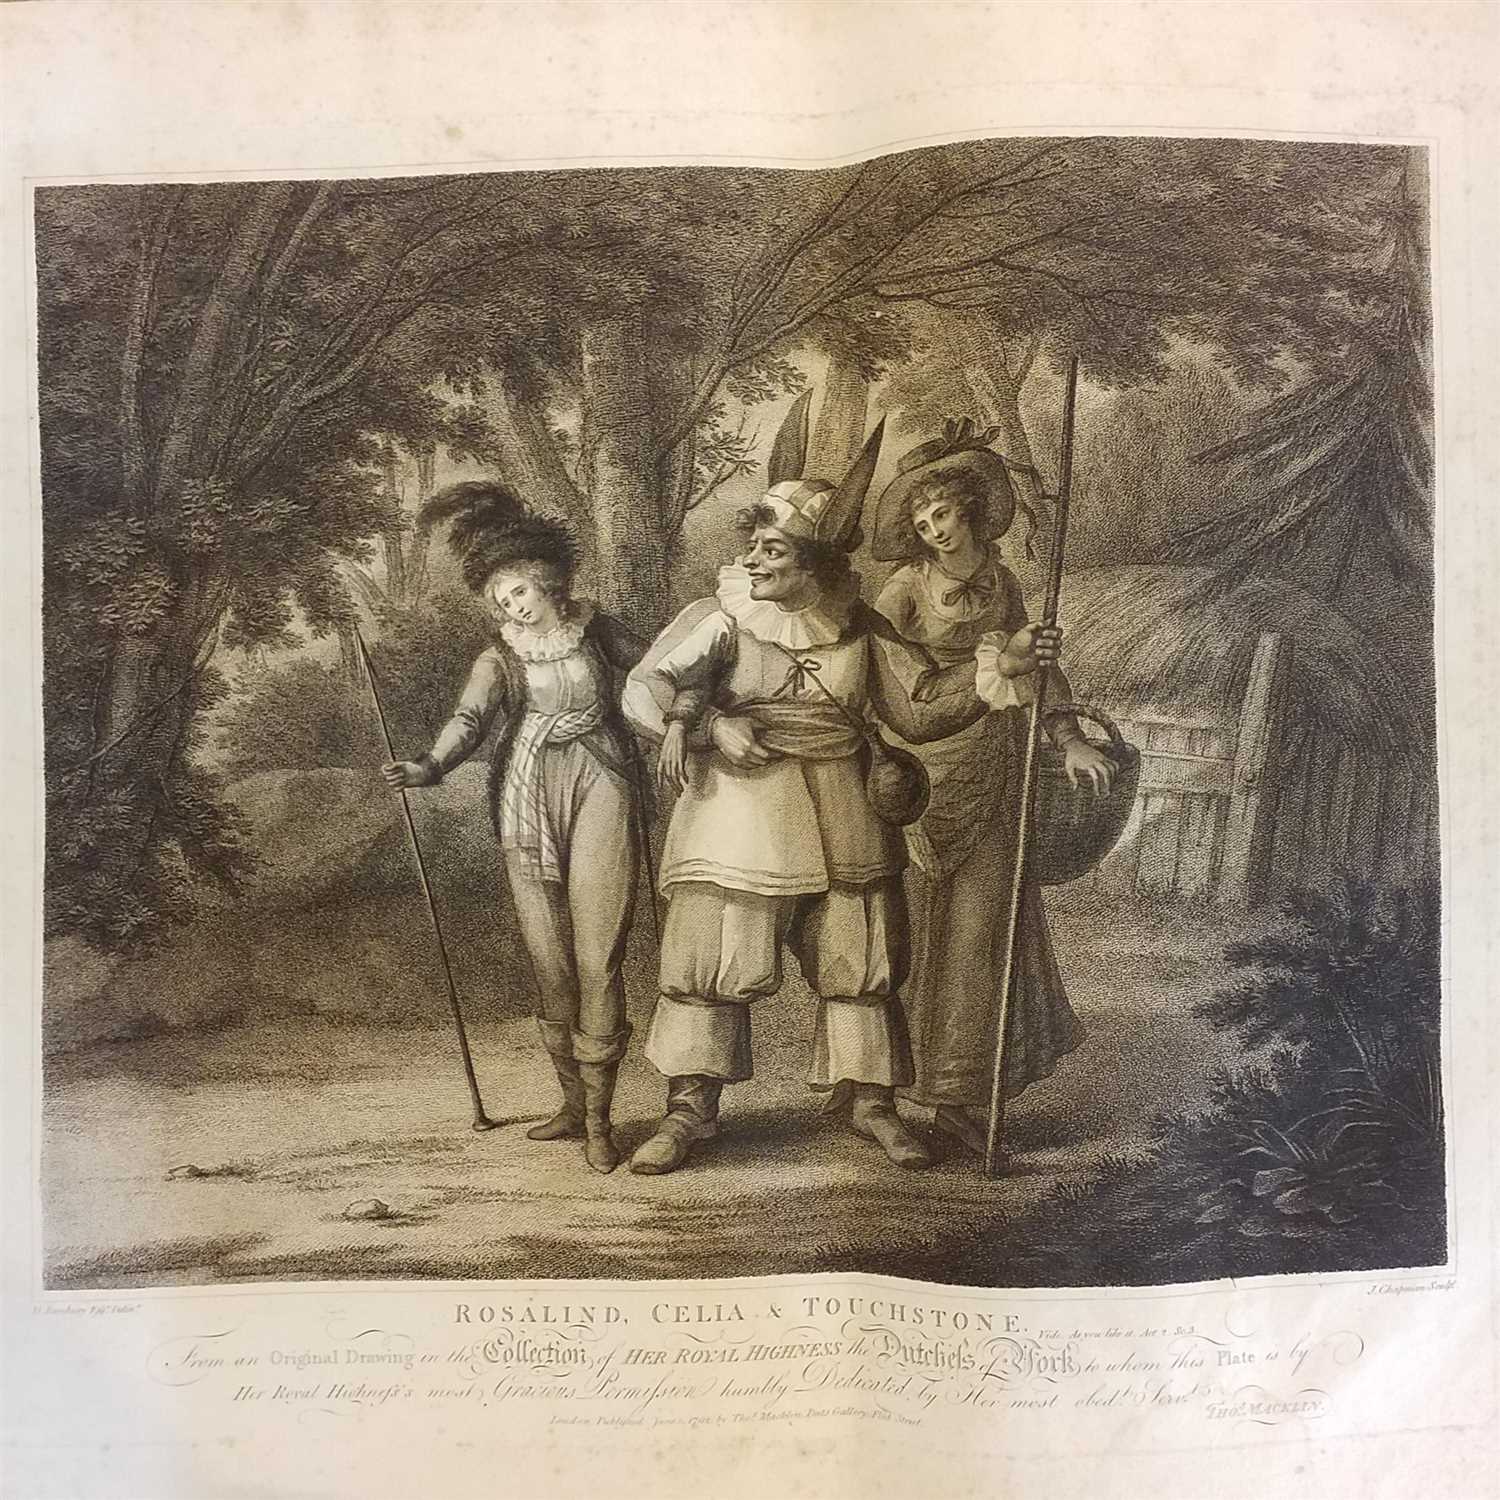 Lot 350 - Bunbury (Henry). A Series of Prints from the Plays of Shakespeare, 1794